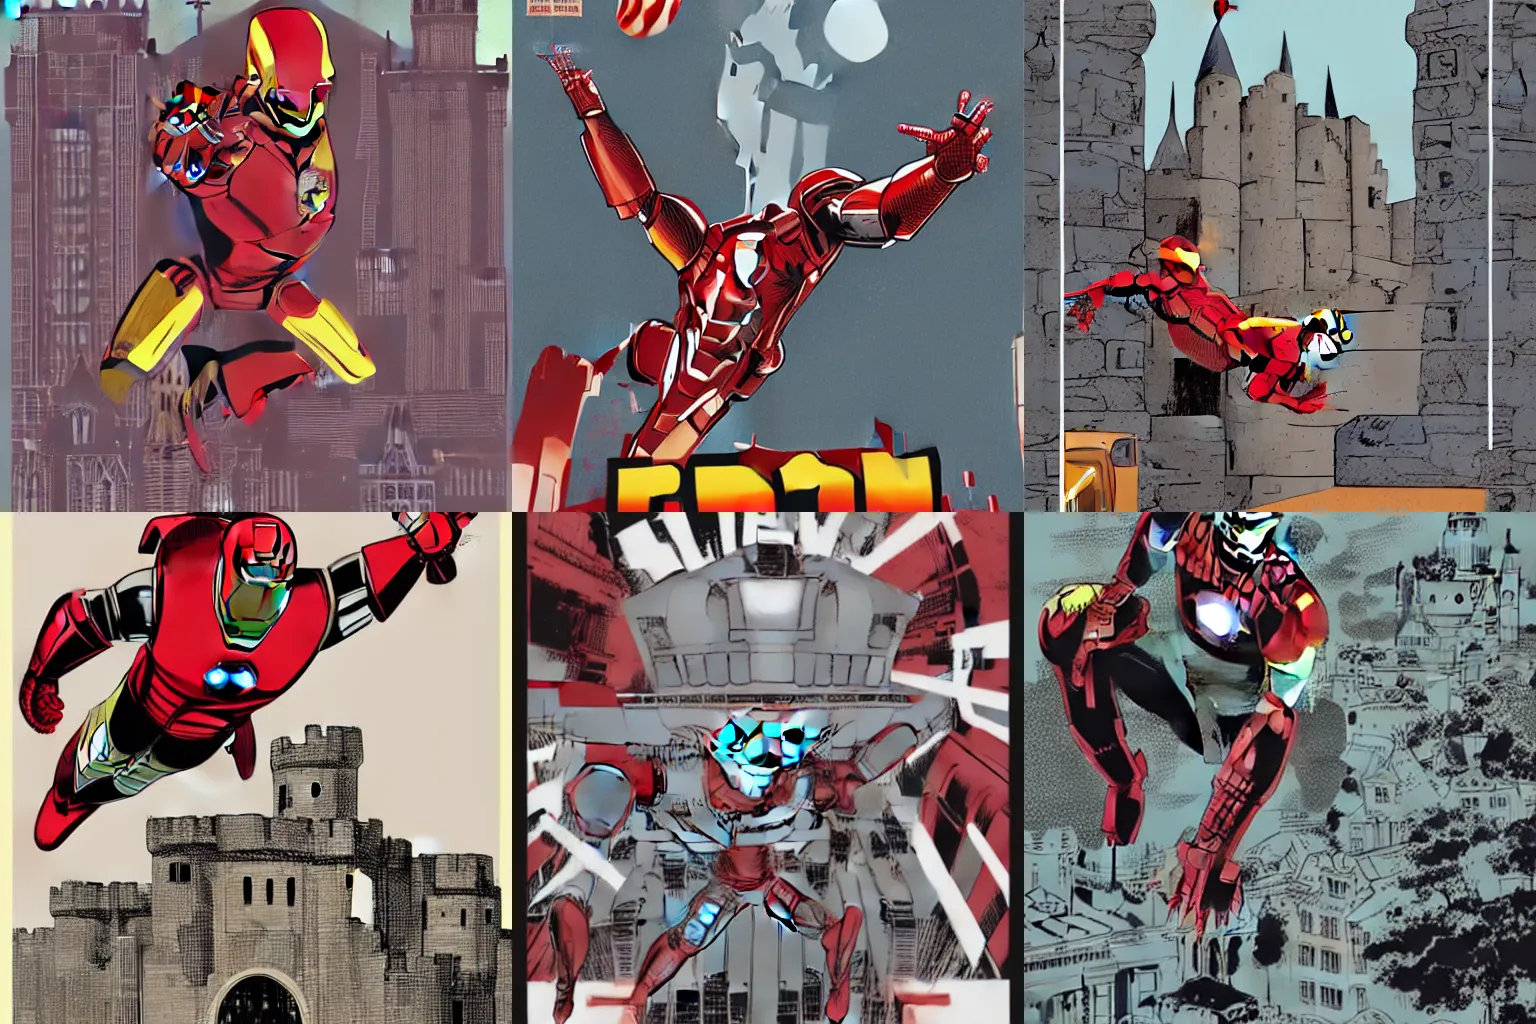 Prompt: Iron man flying above a large castle, David Aja, comic book art